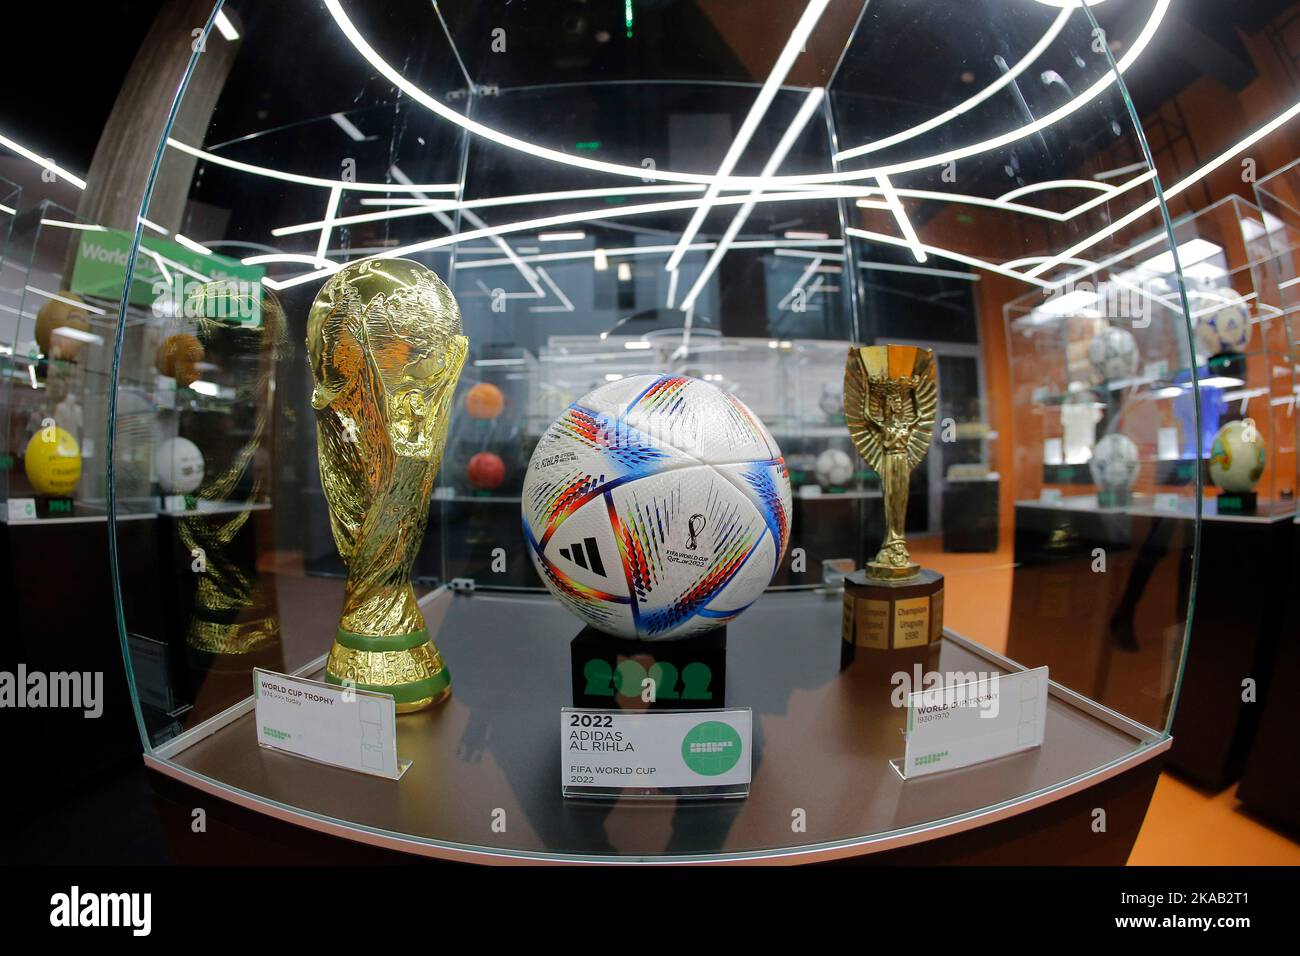 Romania, Romania. 1st Nov, 2022. World Cup trophies and the official football for the upcoming FIFA World Cup Qatar 2022 are seen on the opening day of a football museum in Bucharest, Romania, Nov. 1, 2022. The museum, first of its kind in Romania, hosts various objects from football history, shirts and boots belonging to famous players and various recreational places. Credit: Cristian Cristel/Xinhua/Alamy Live News Stock Photo